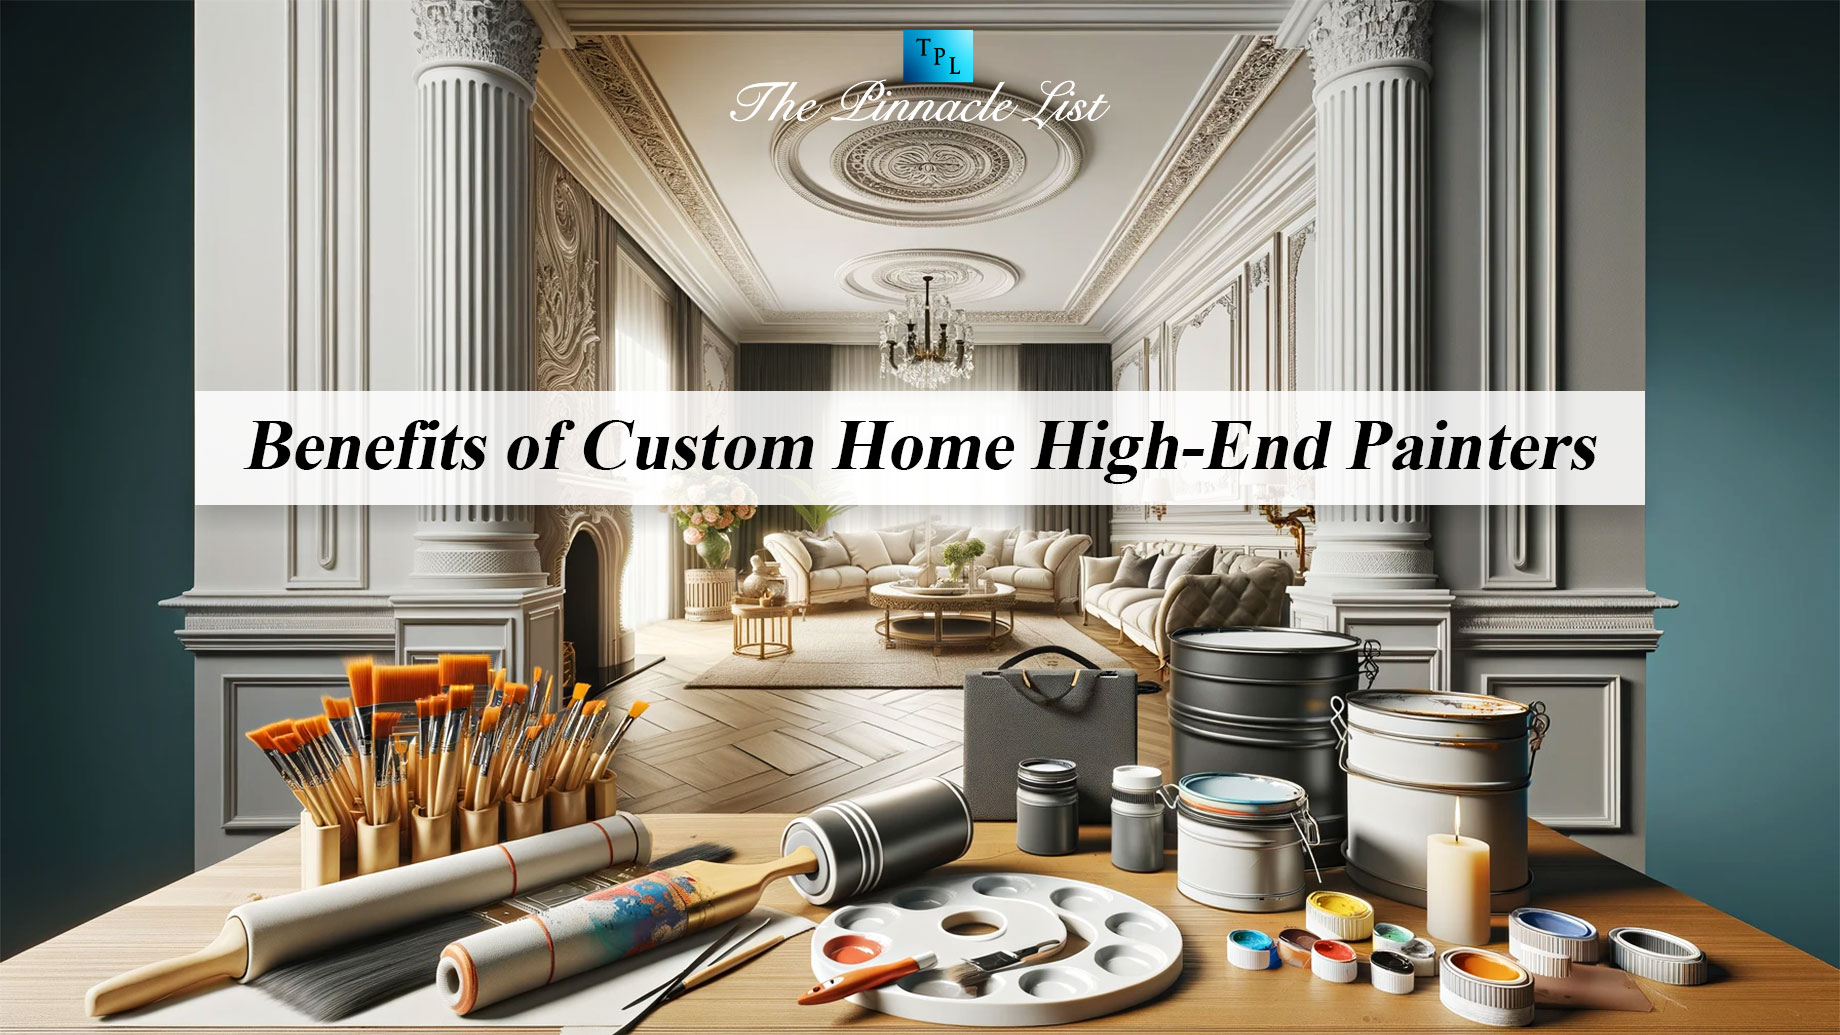 Benefits of Custom Home High-End Painters